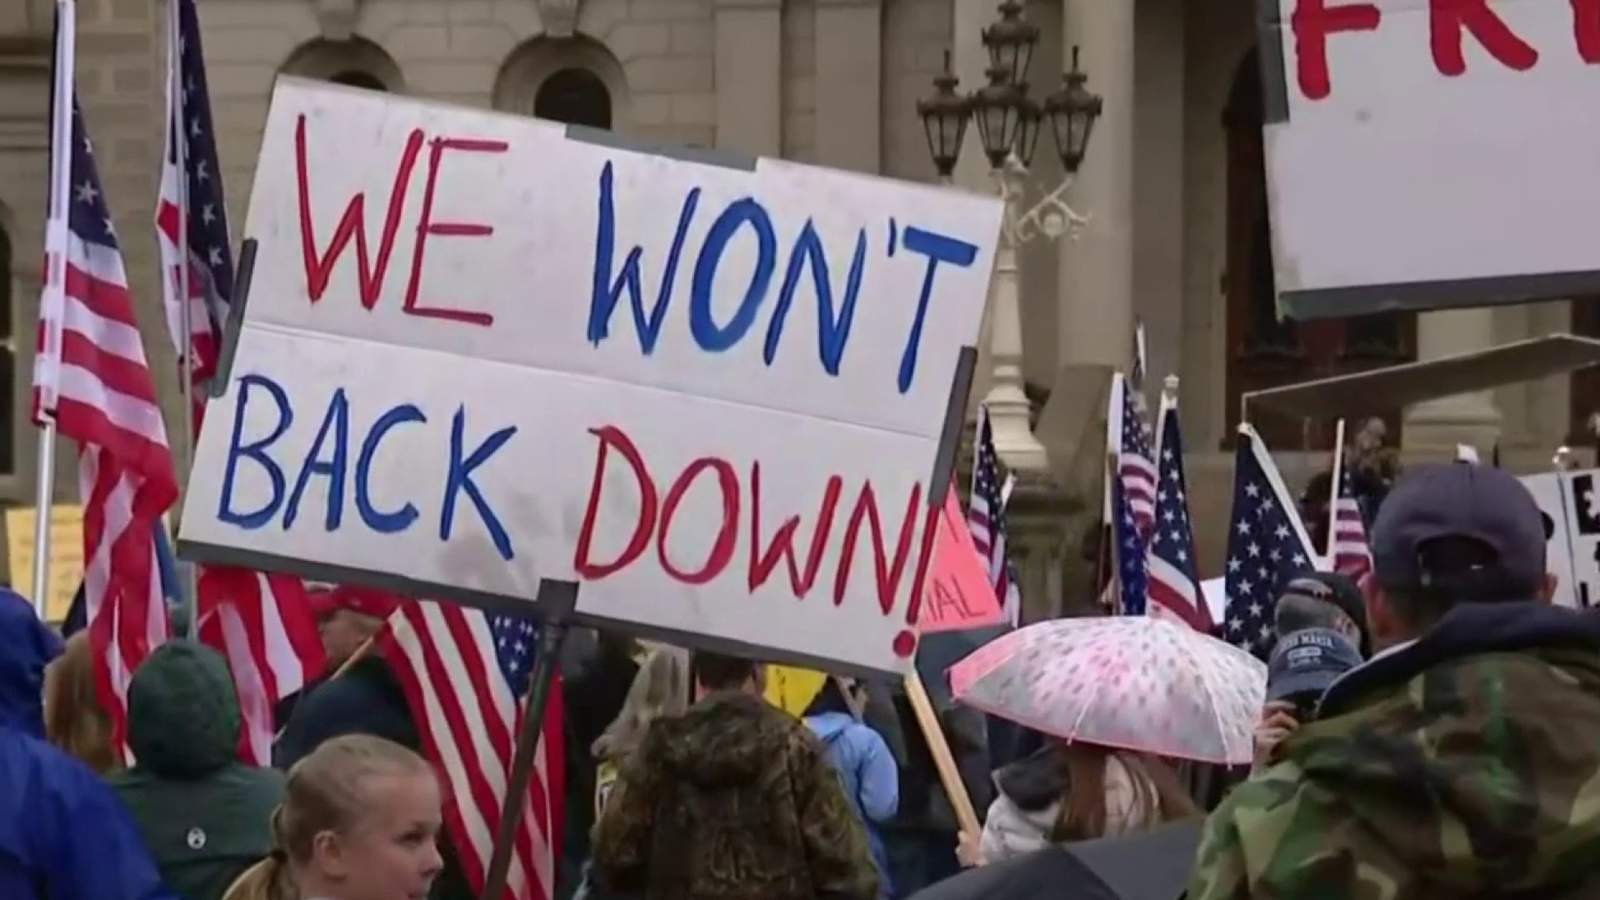 Michigan legislators say they’ll let state of emergency expire; protesters demand state reopens